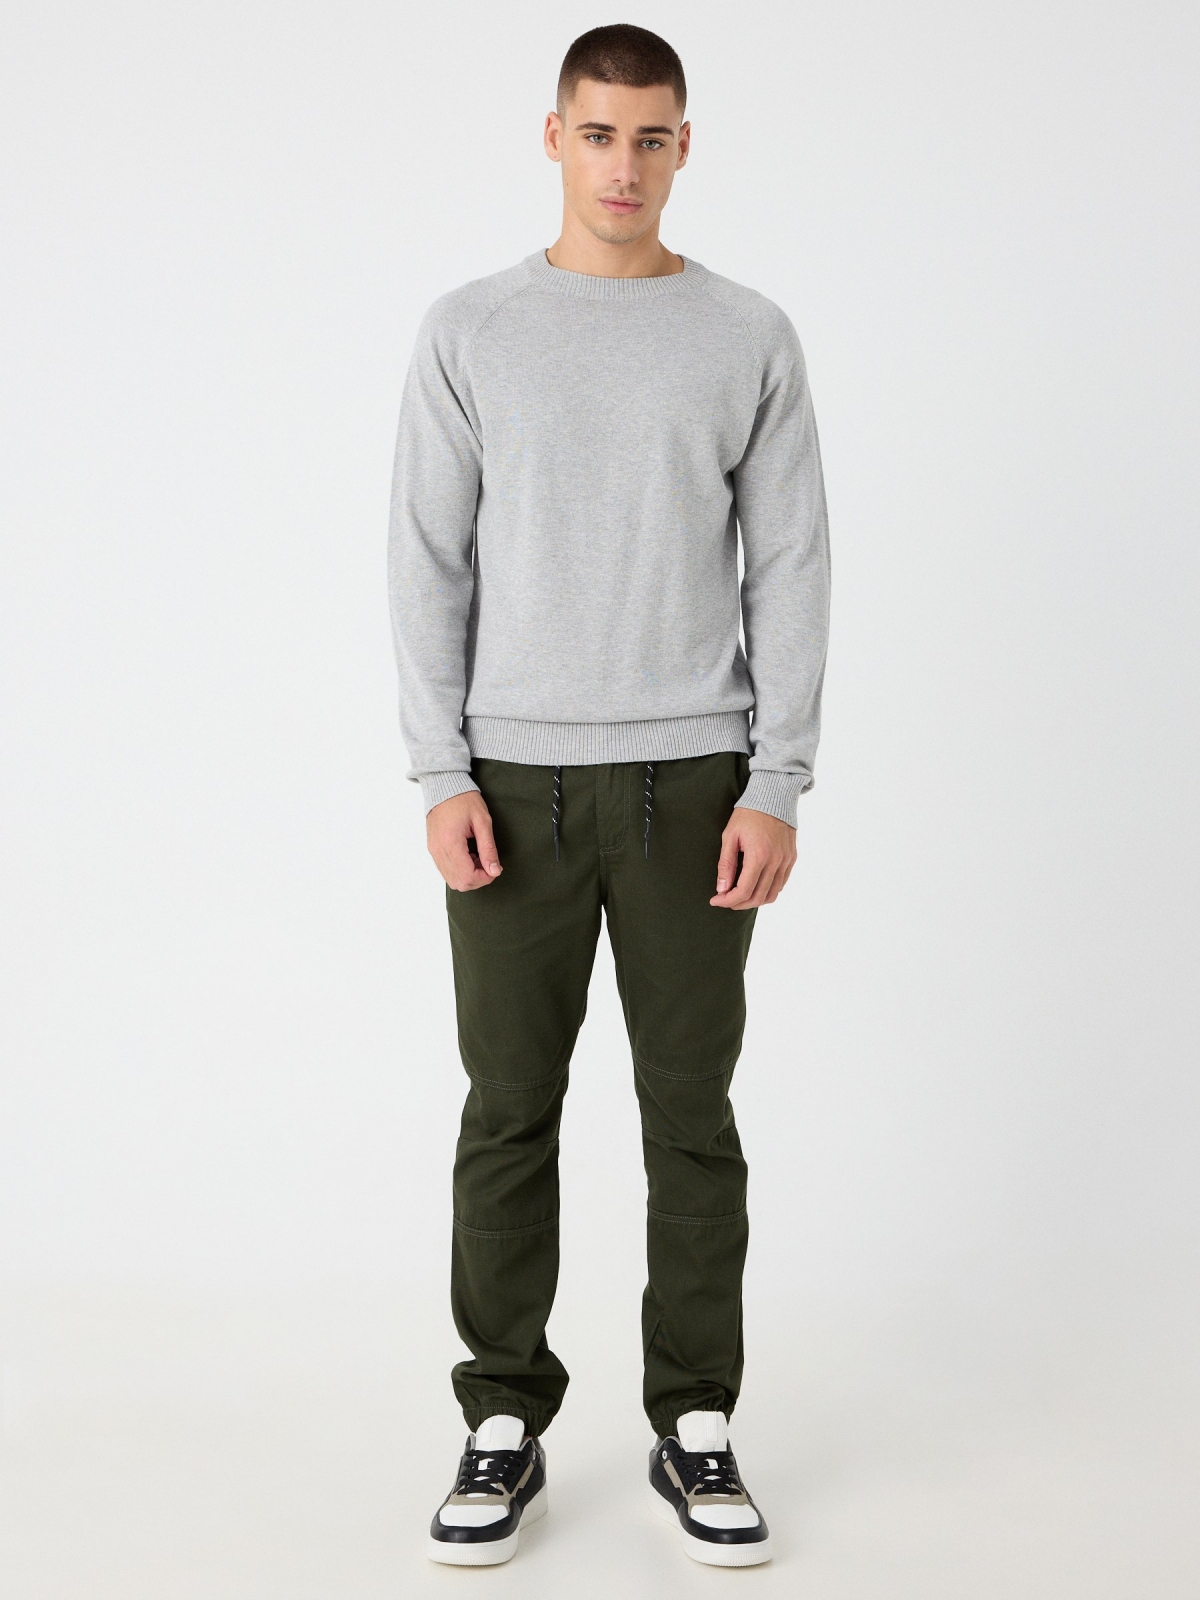 Knotted jogger pants khaki front view